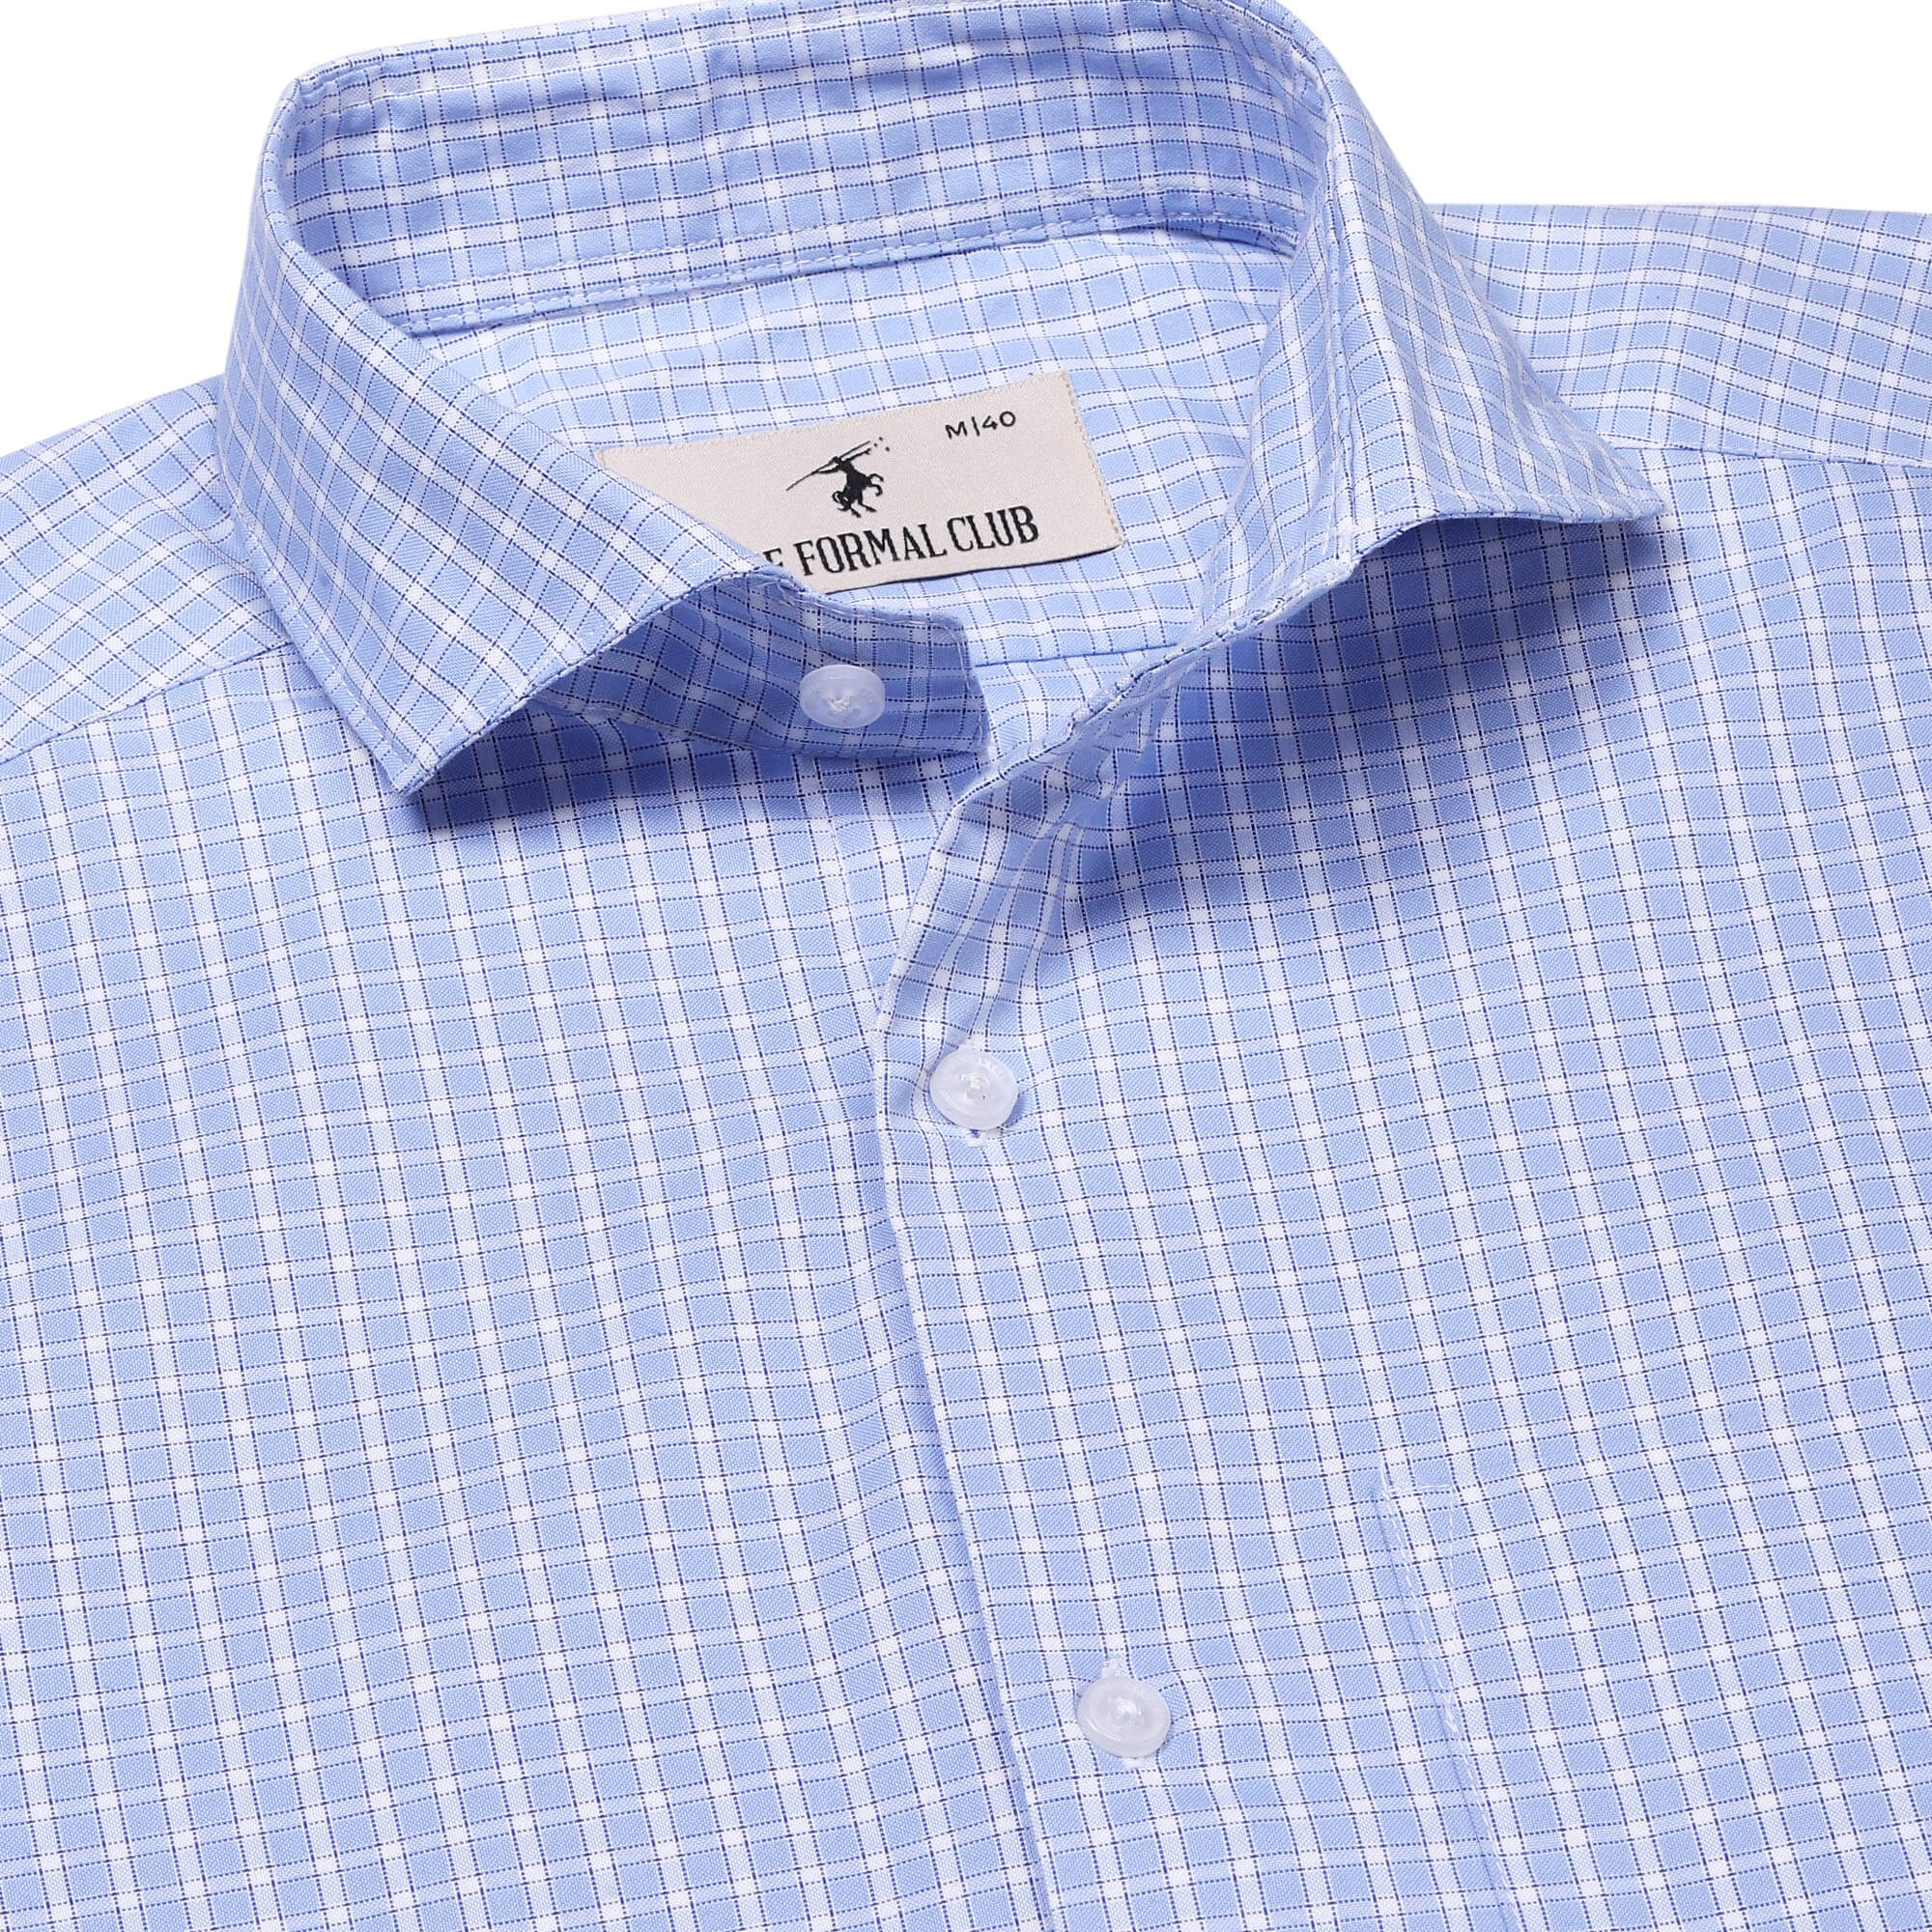 Regal Oxford Check Shirt In Sky Blue Regular Fit - The Formal Club